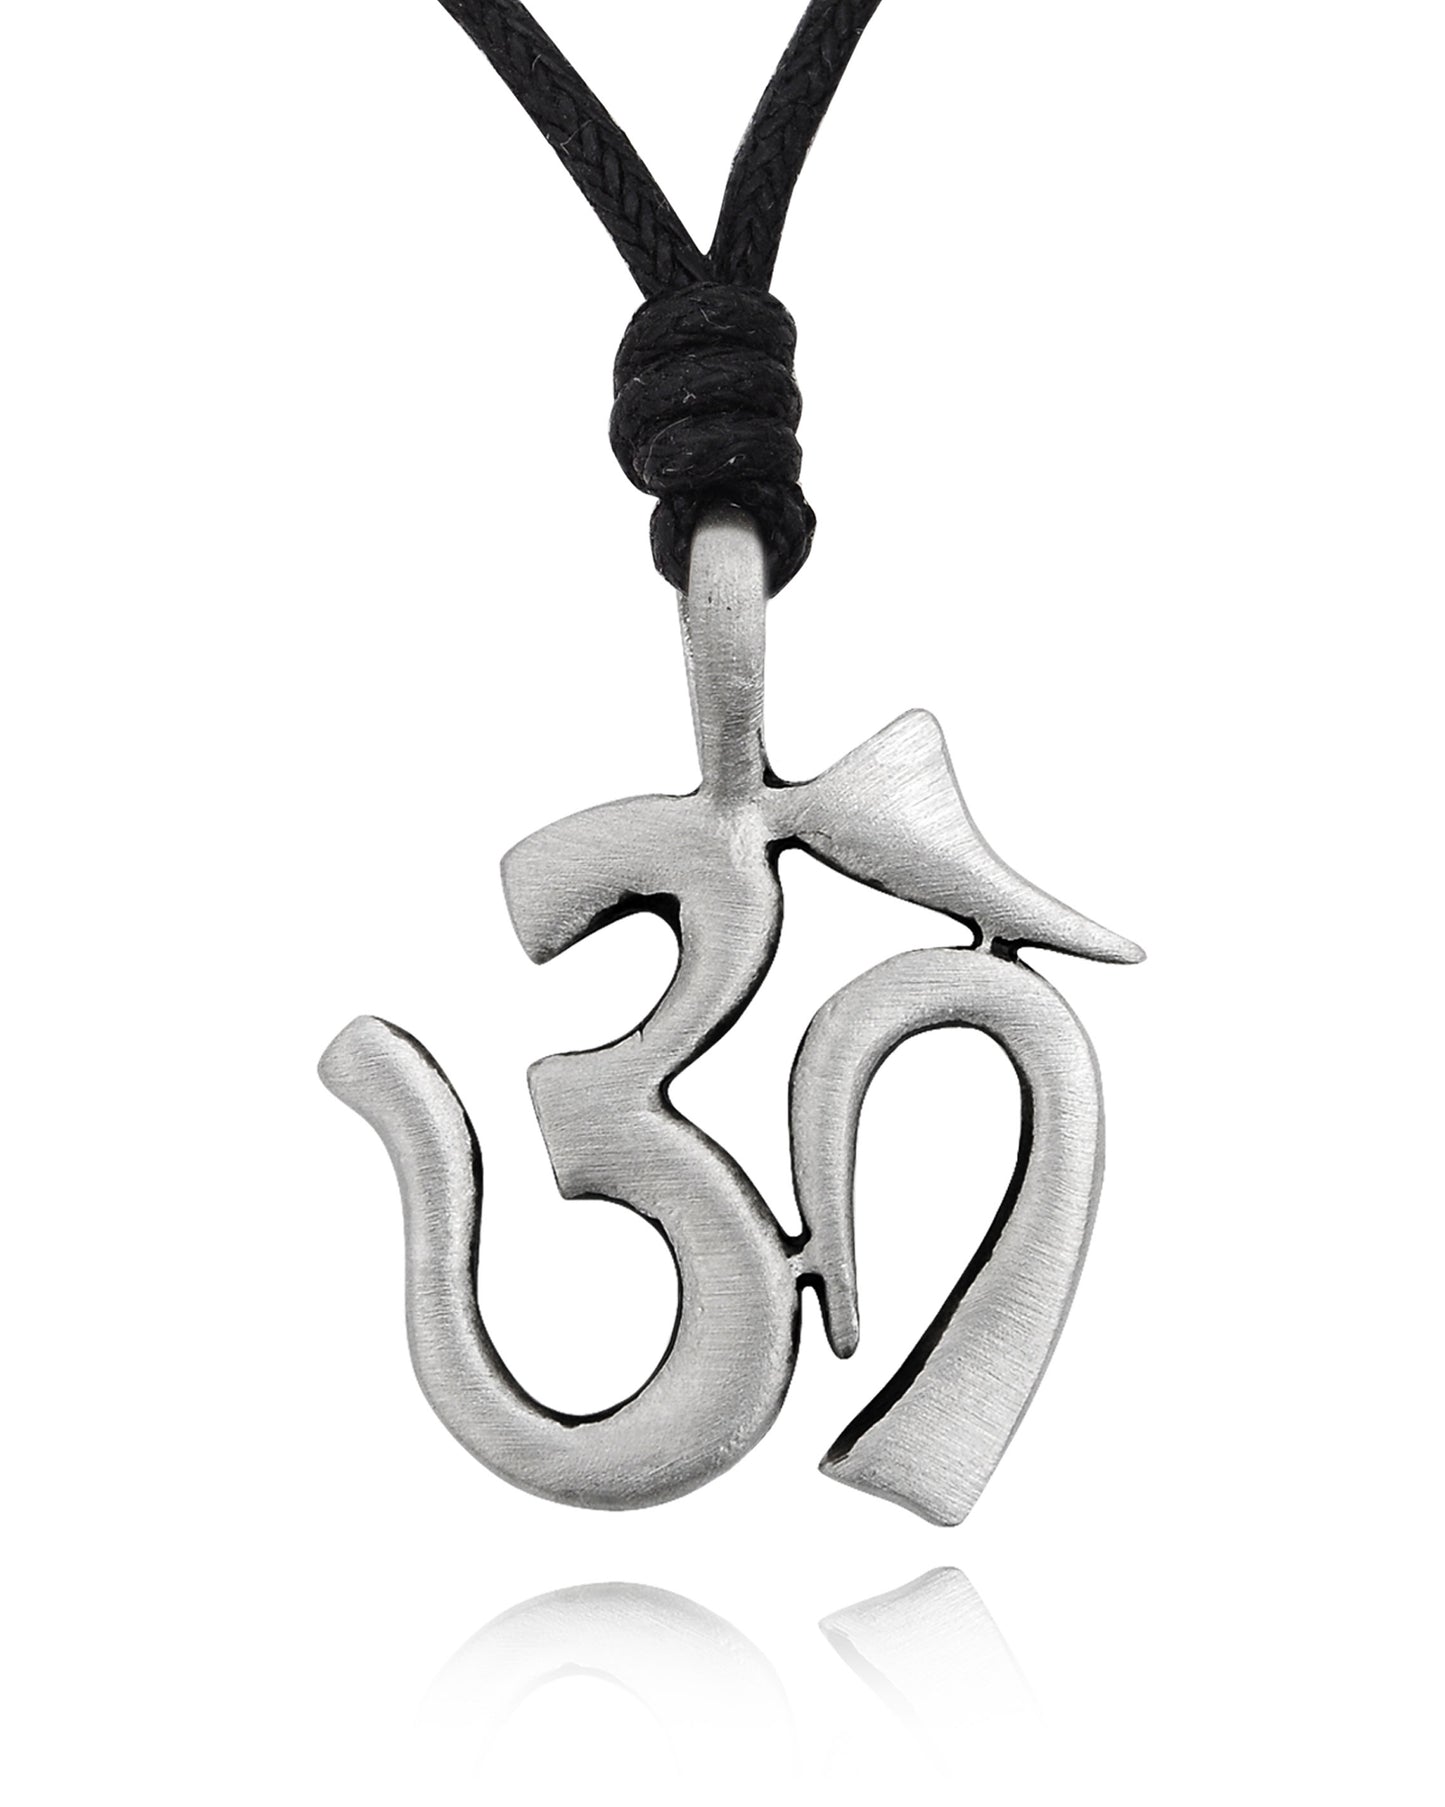 Om Omh Hindu Word Yoga Silver Pewter Charm Necklace Pendant Jewelry